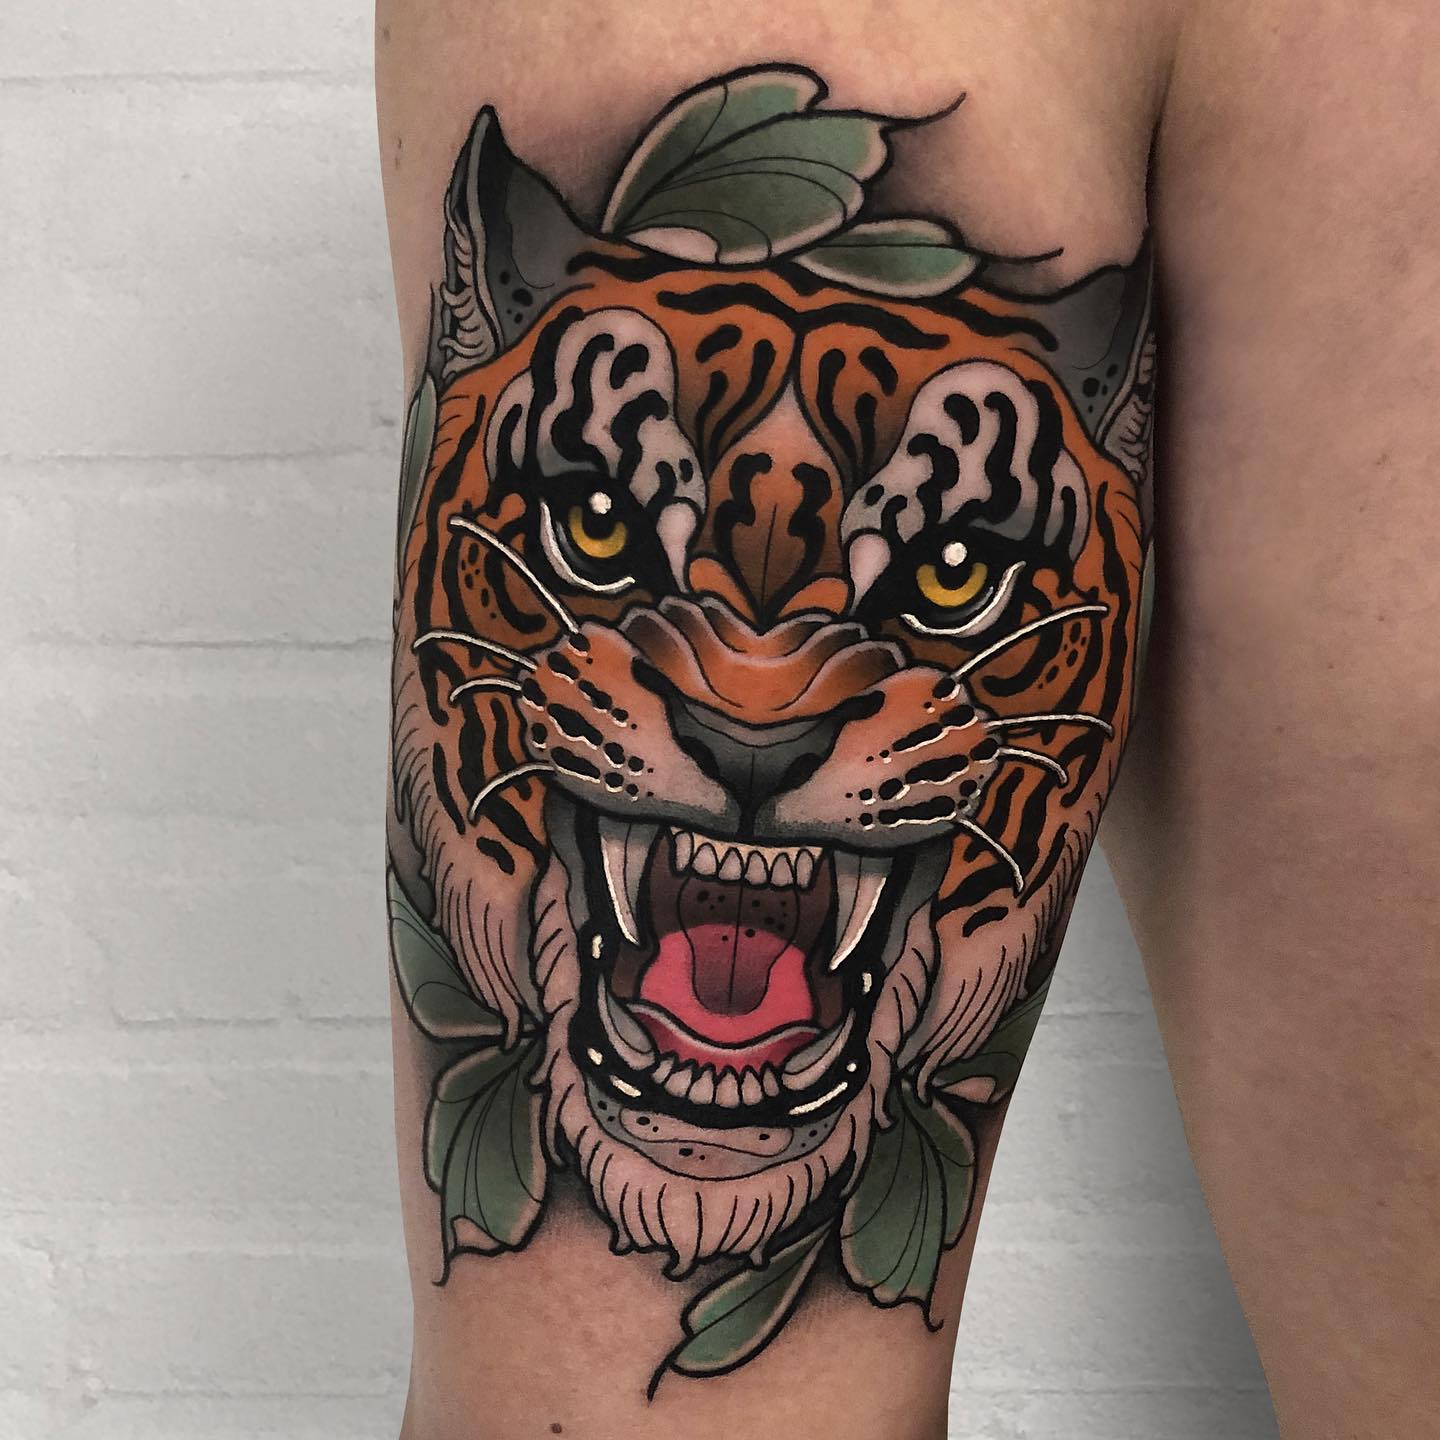 Neo traditional tiger tattoo by jj.neotraditional